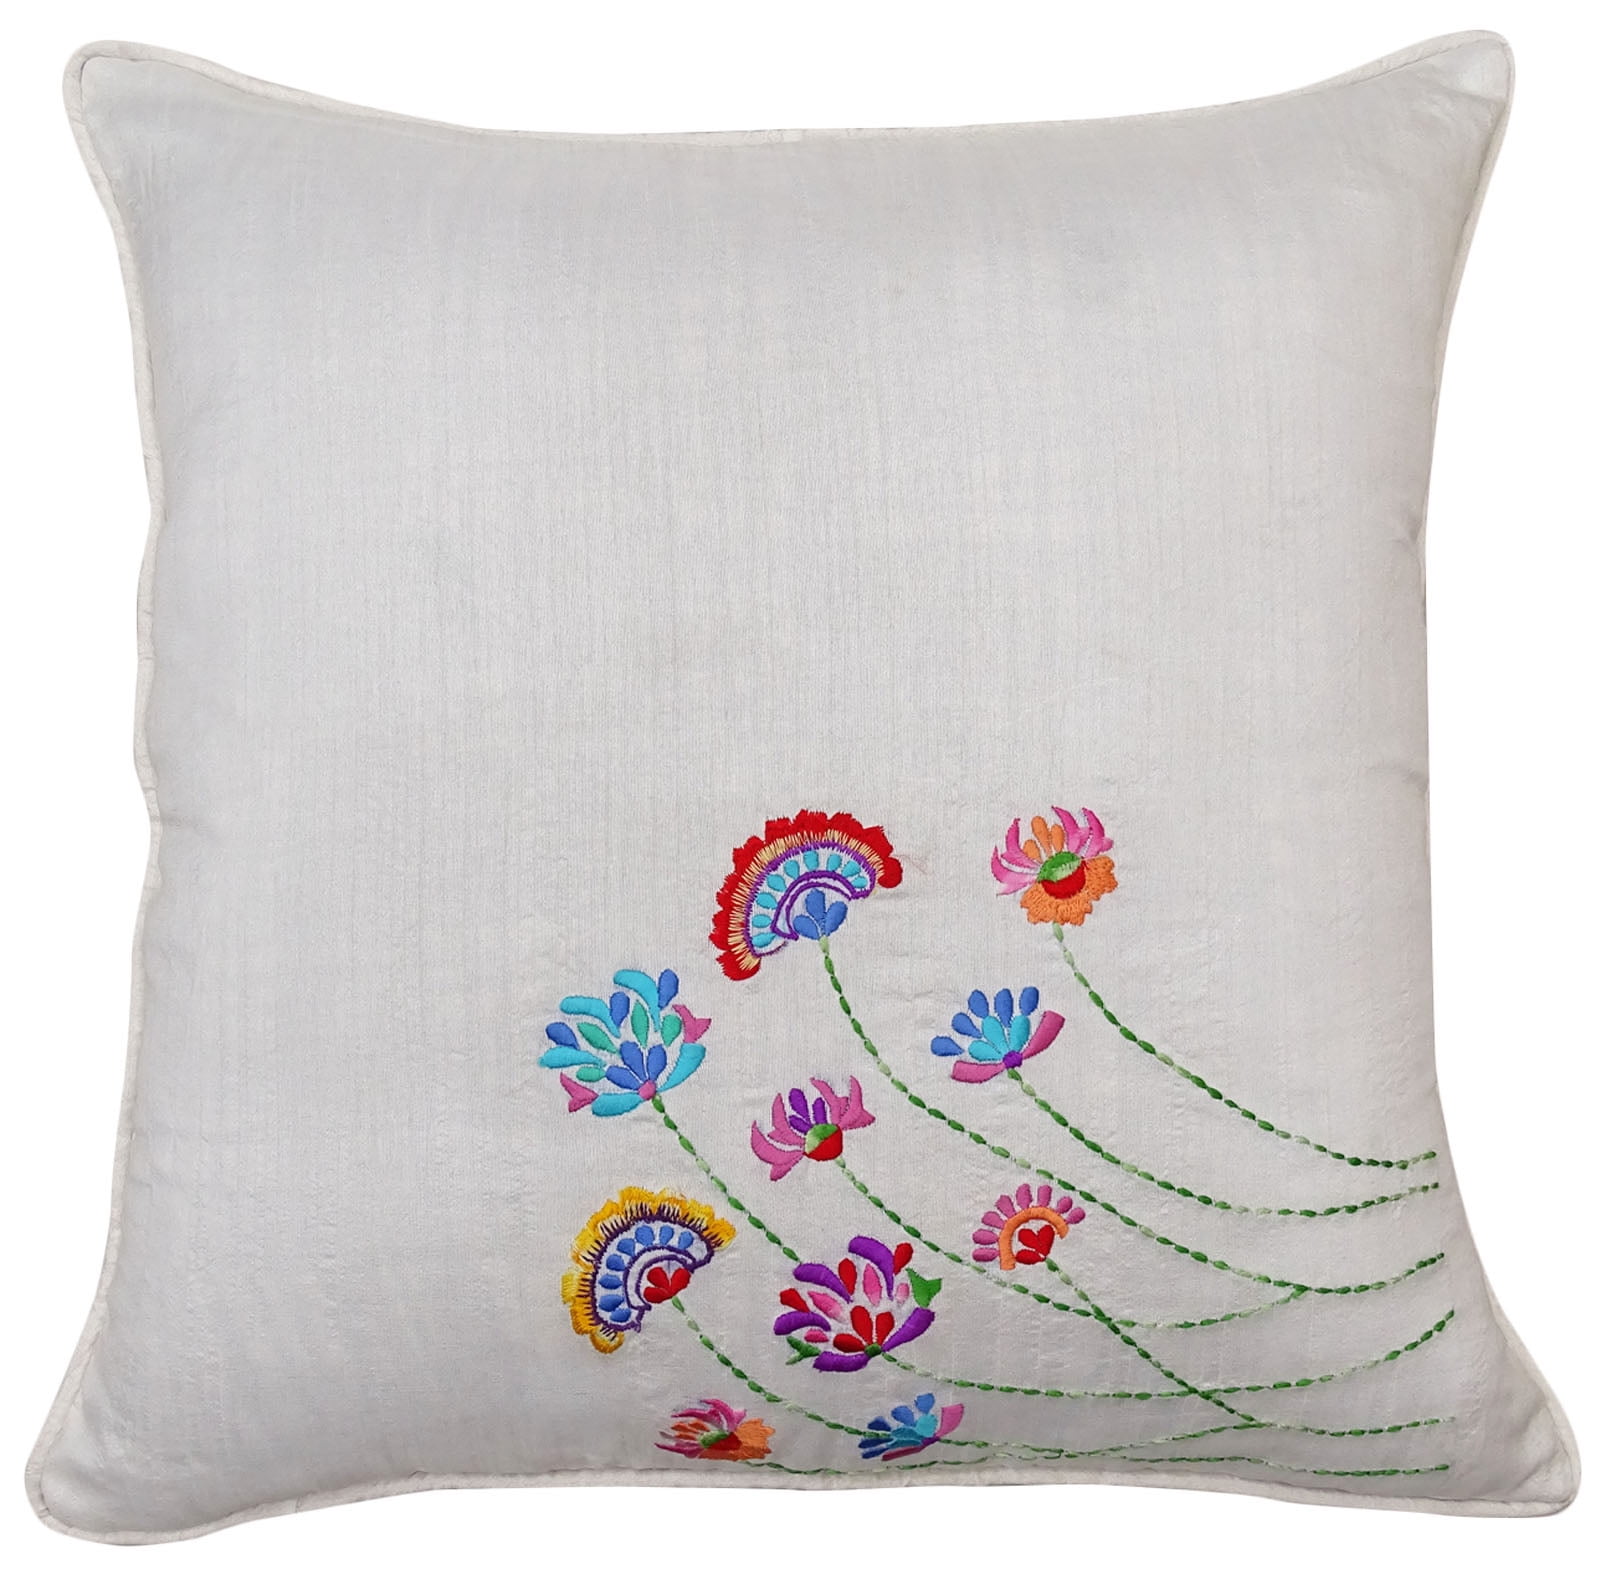 Floral Embroidered White Cushion Cover Decorative Throw Poly Dupion Pillow Case 